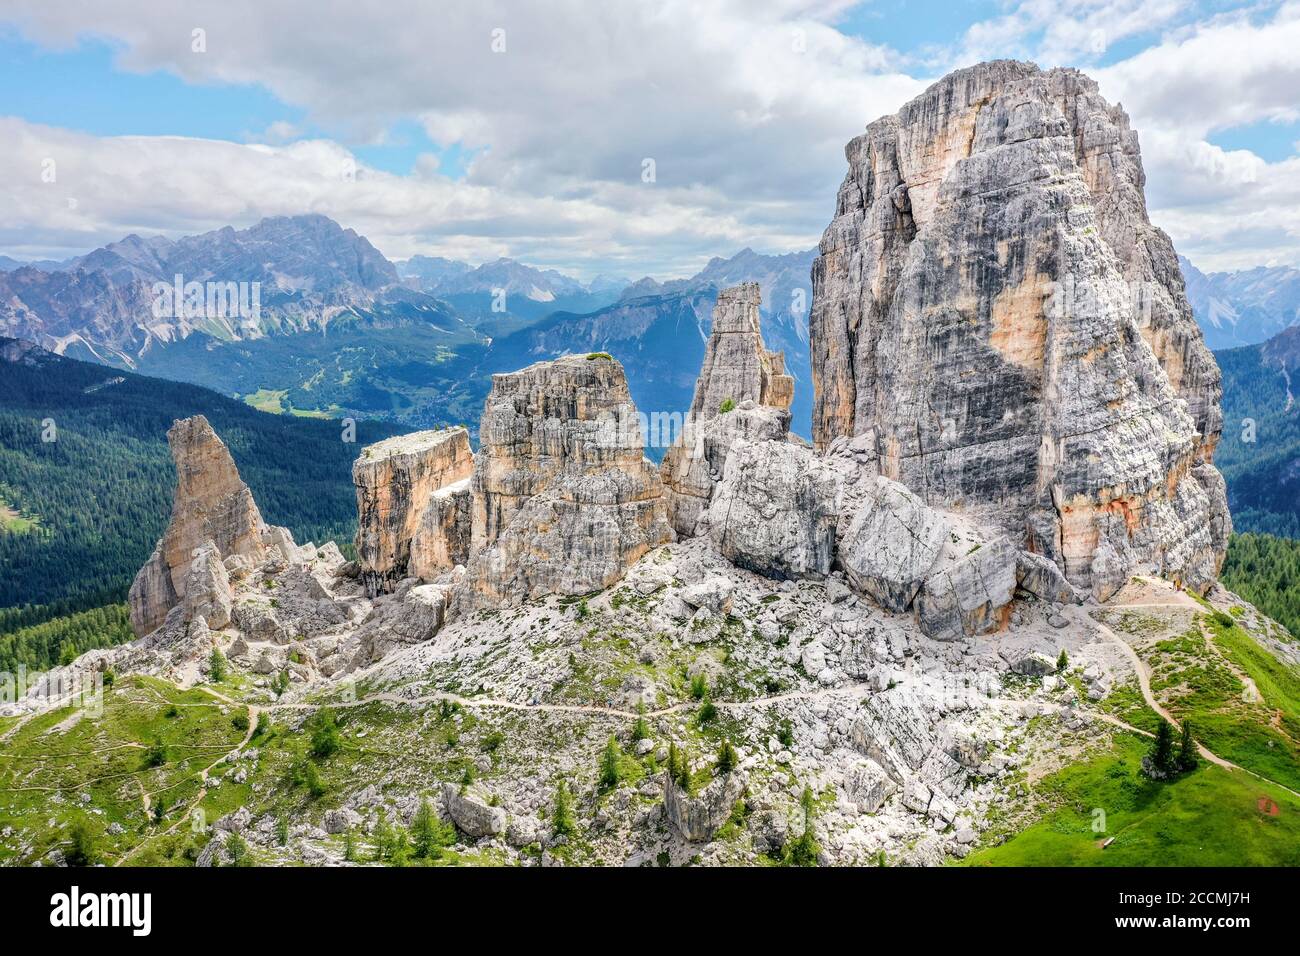 Aerial view of the Cinque Torri rock formation in northern Italian alps Stock Photo